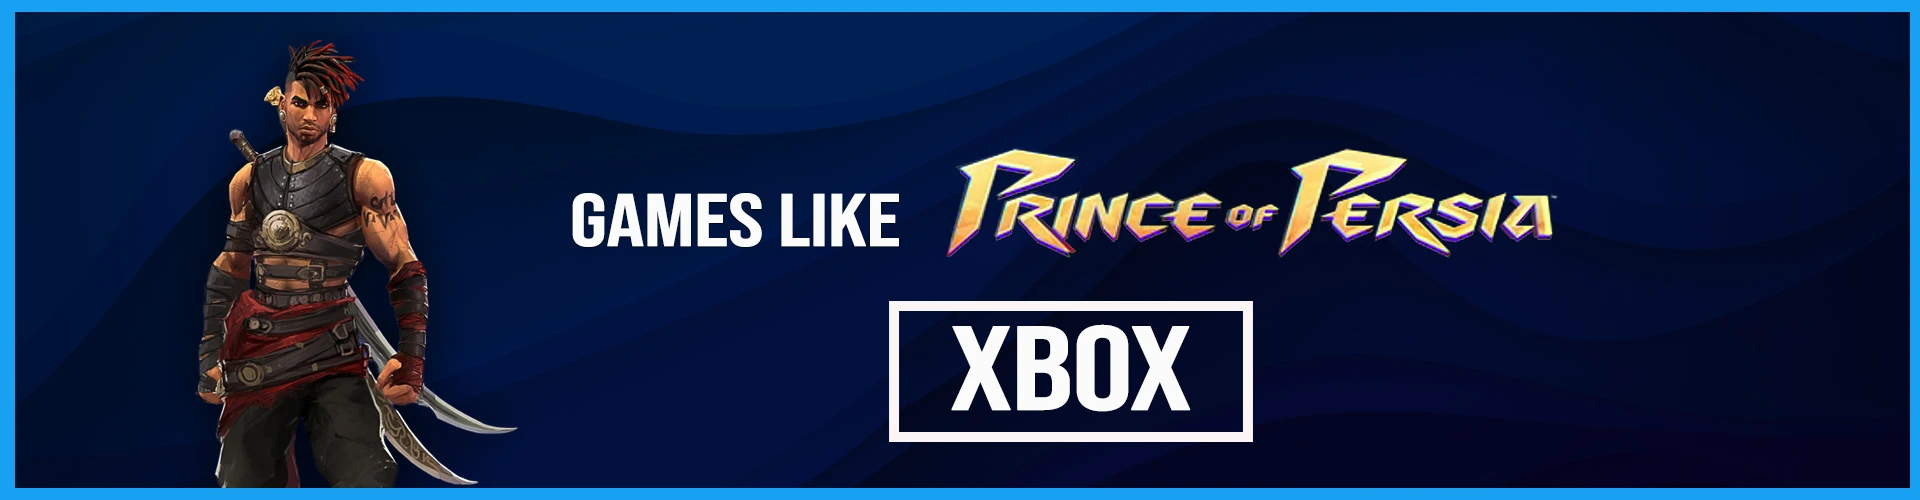 The Top Games Like Prince of Persia for Xbox